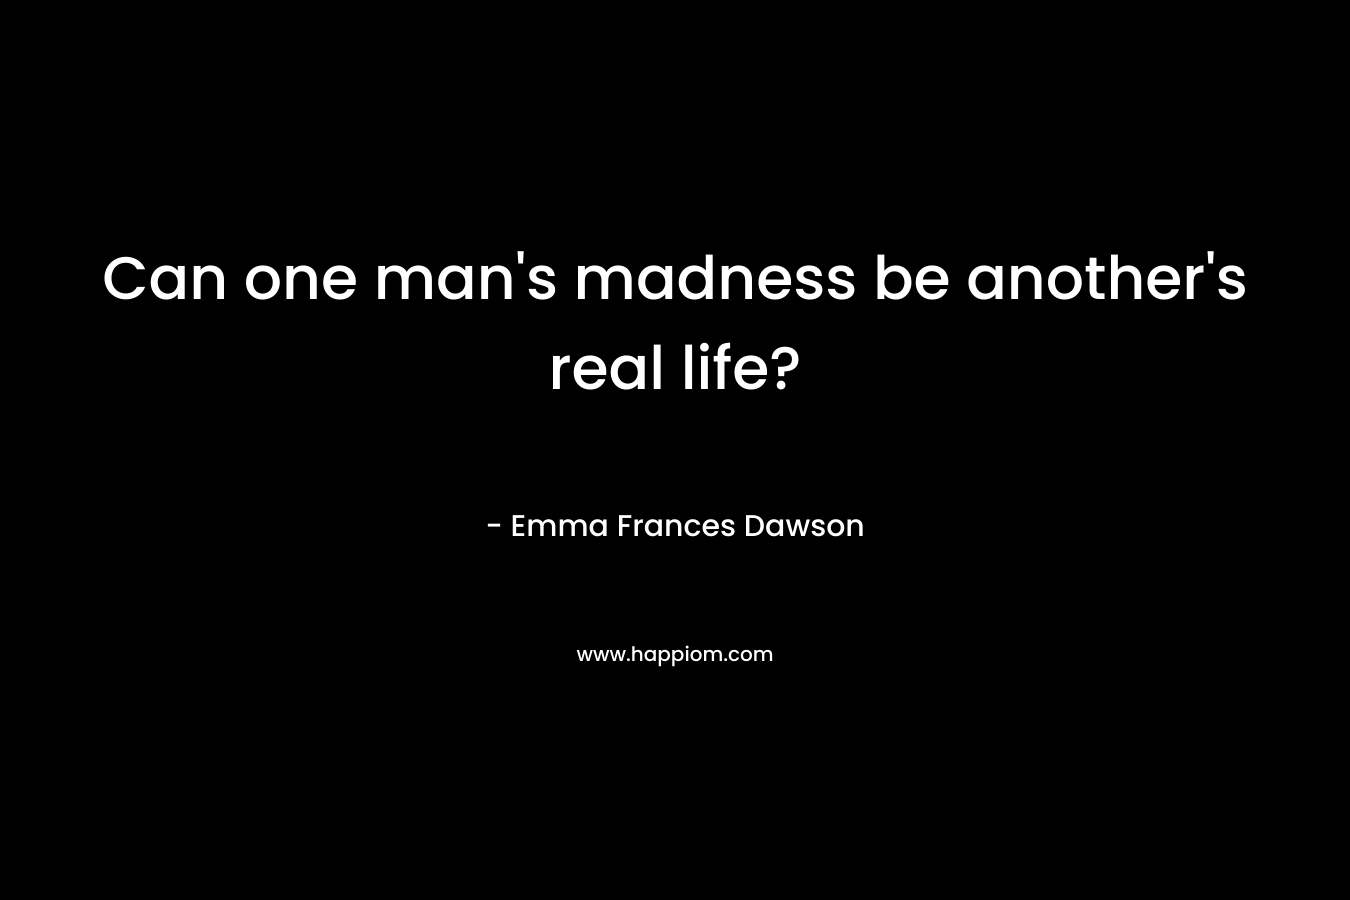 Can one man’s madness be another’s real life? – Emma Frances Dawson